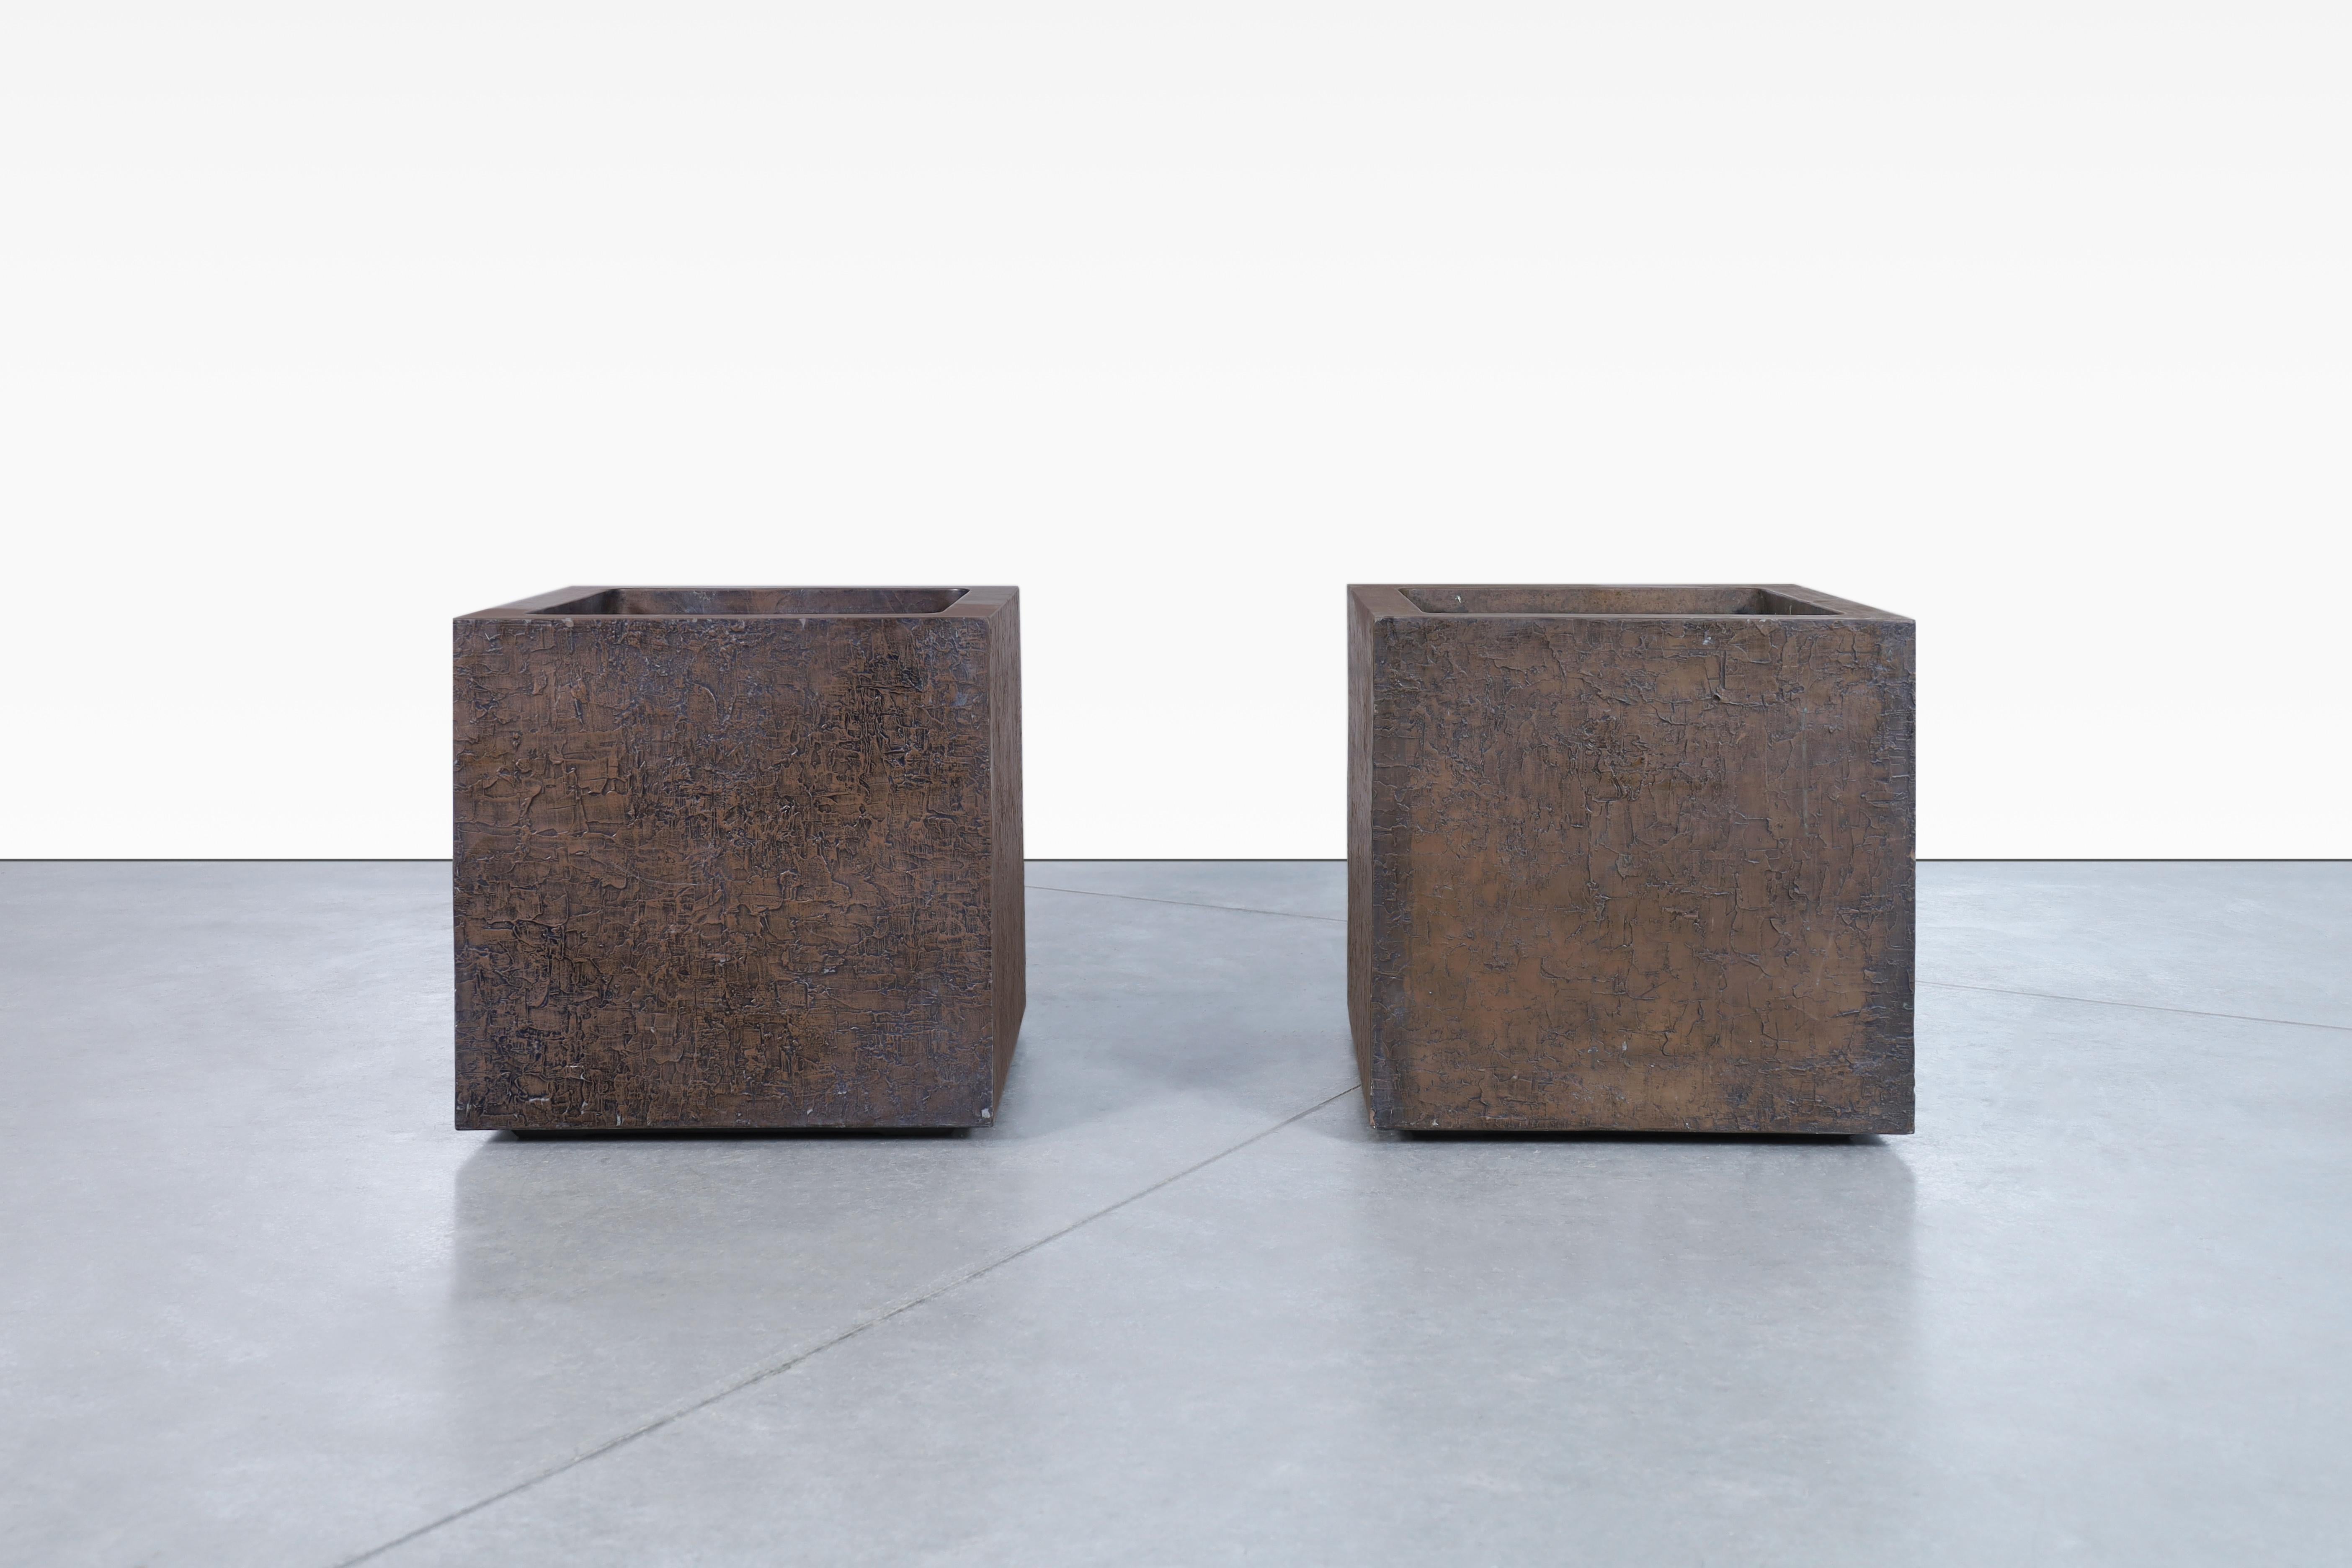 Beautiful mid-century modern bronze resin square planters manufactured in the United States, circa 1970s. These planters are manufactured by the well-known company Forms and Surfaces, and showcase a harmonious fusion of bronze resin, fiberglass, and